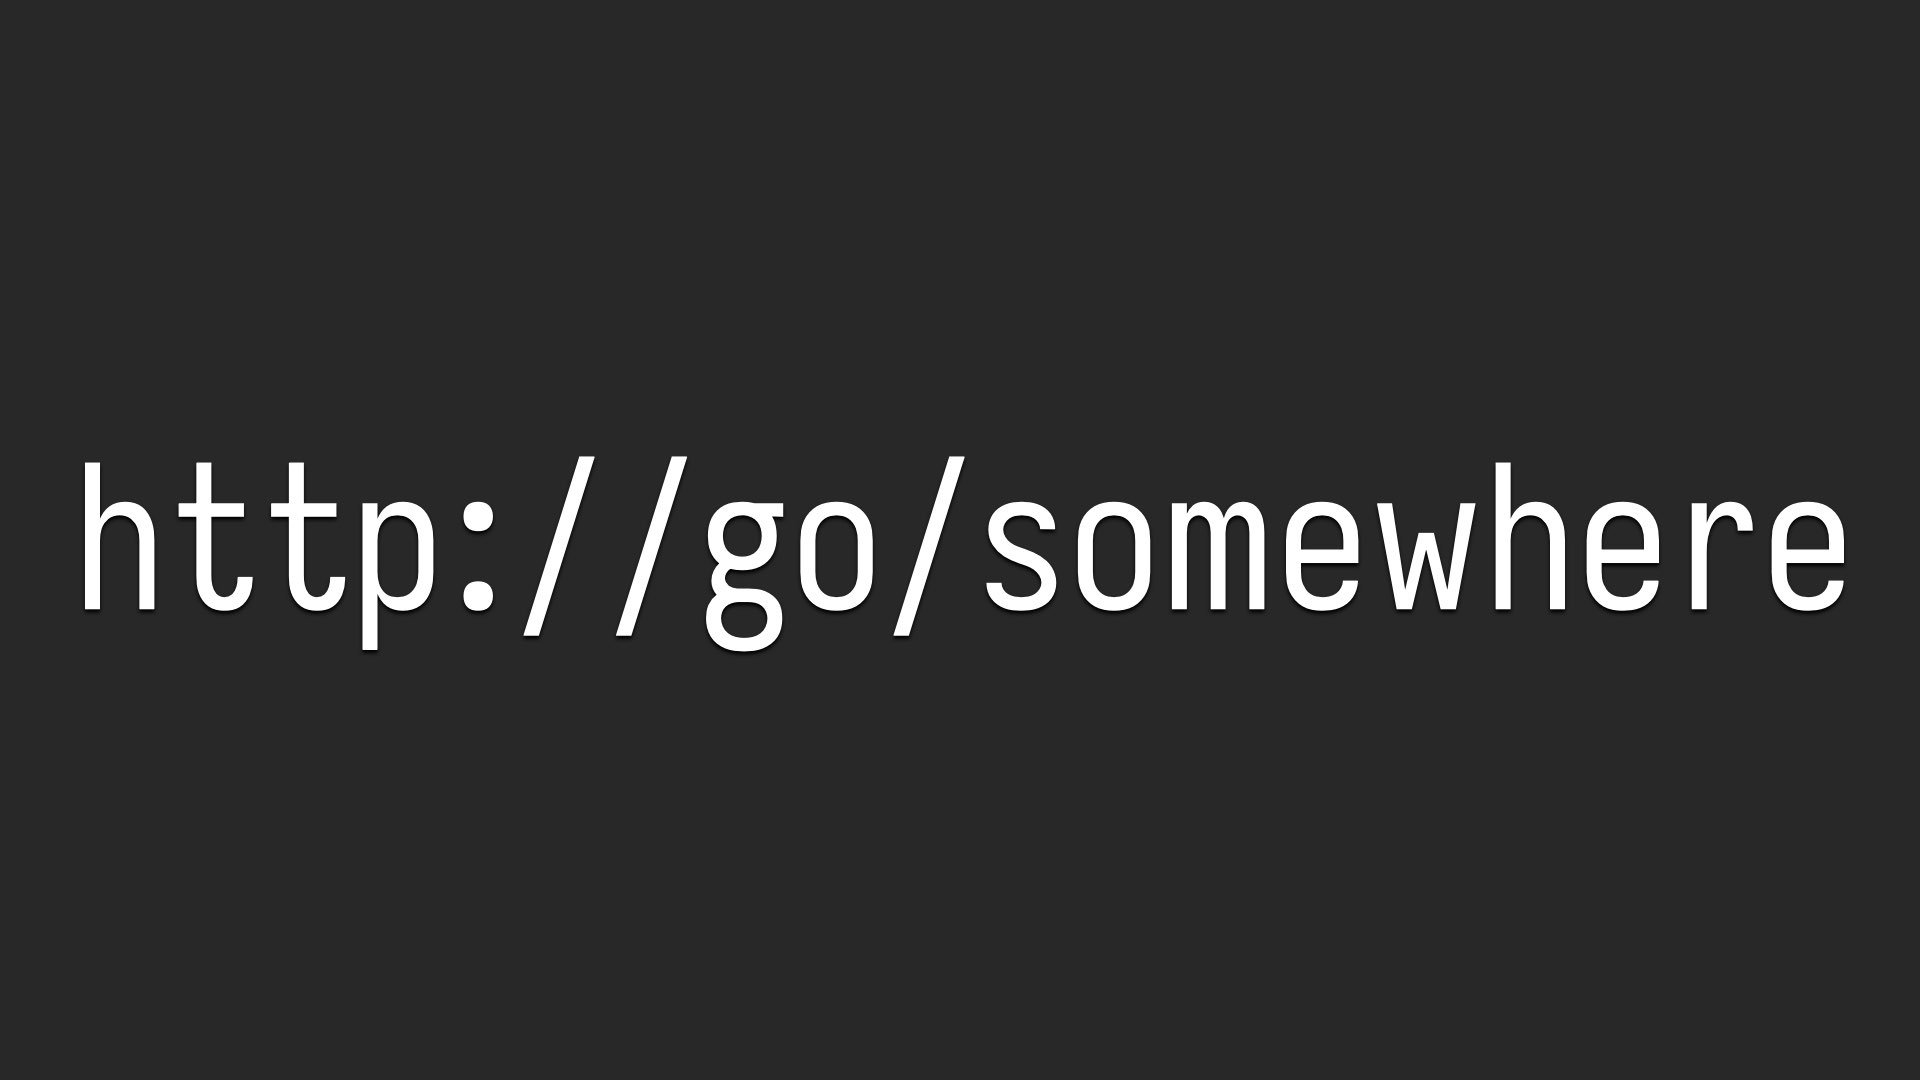 The slide shows http://go/somewhere in large text.